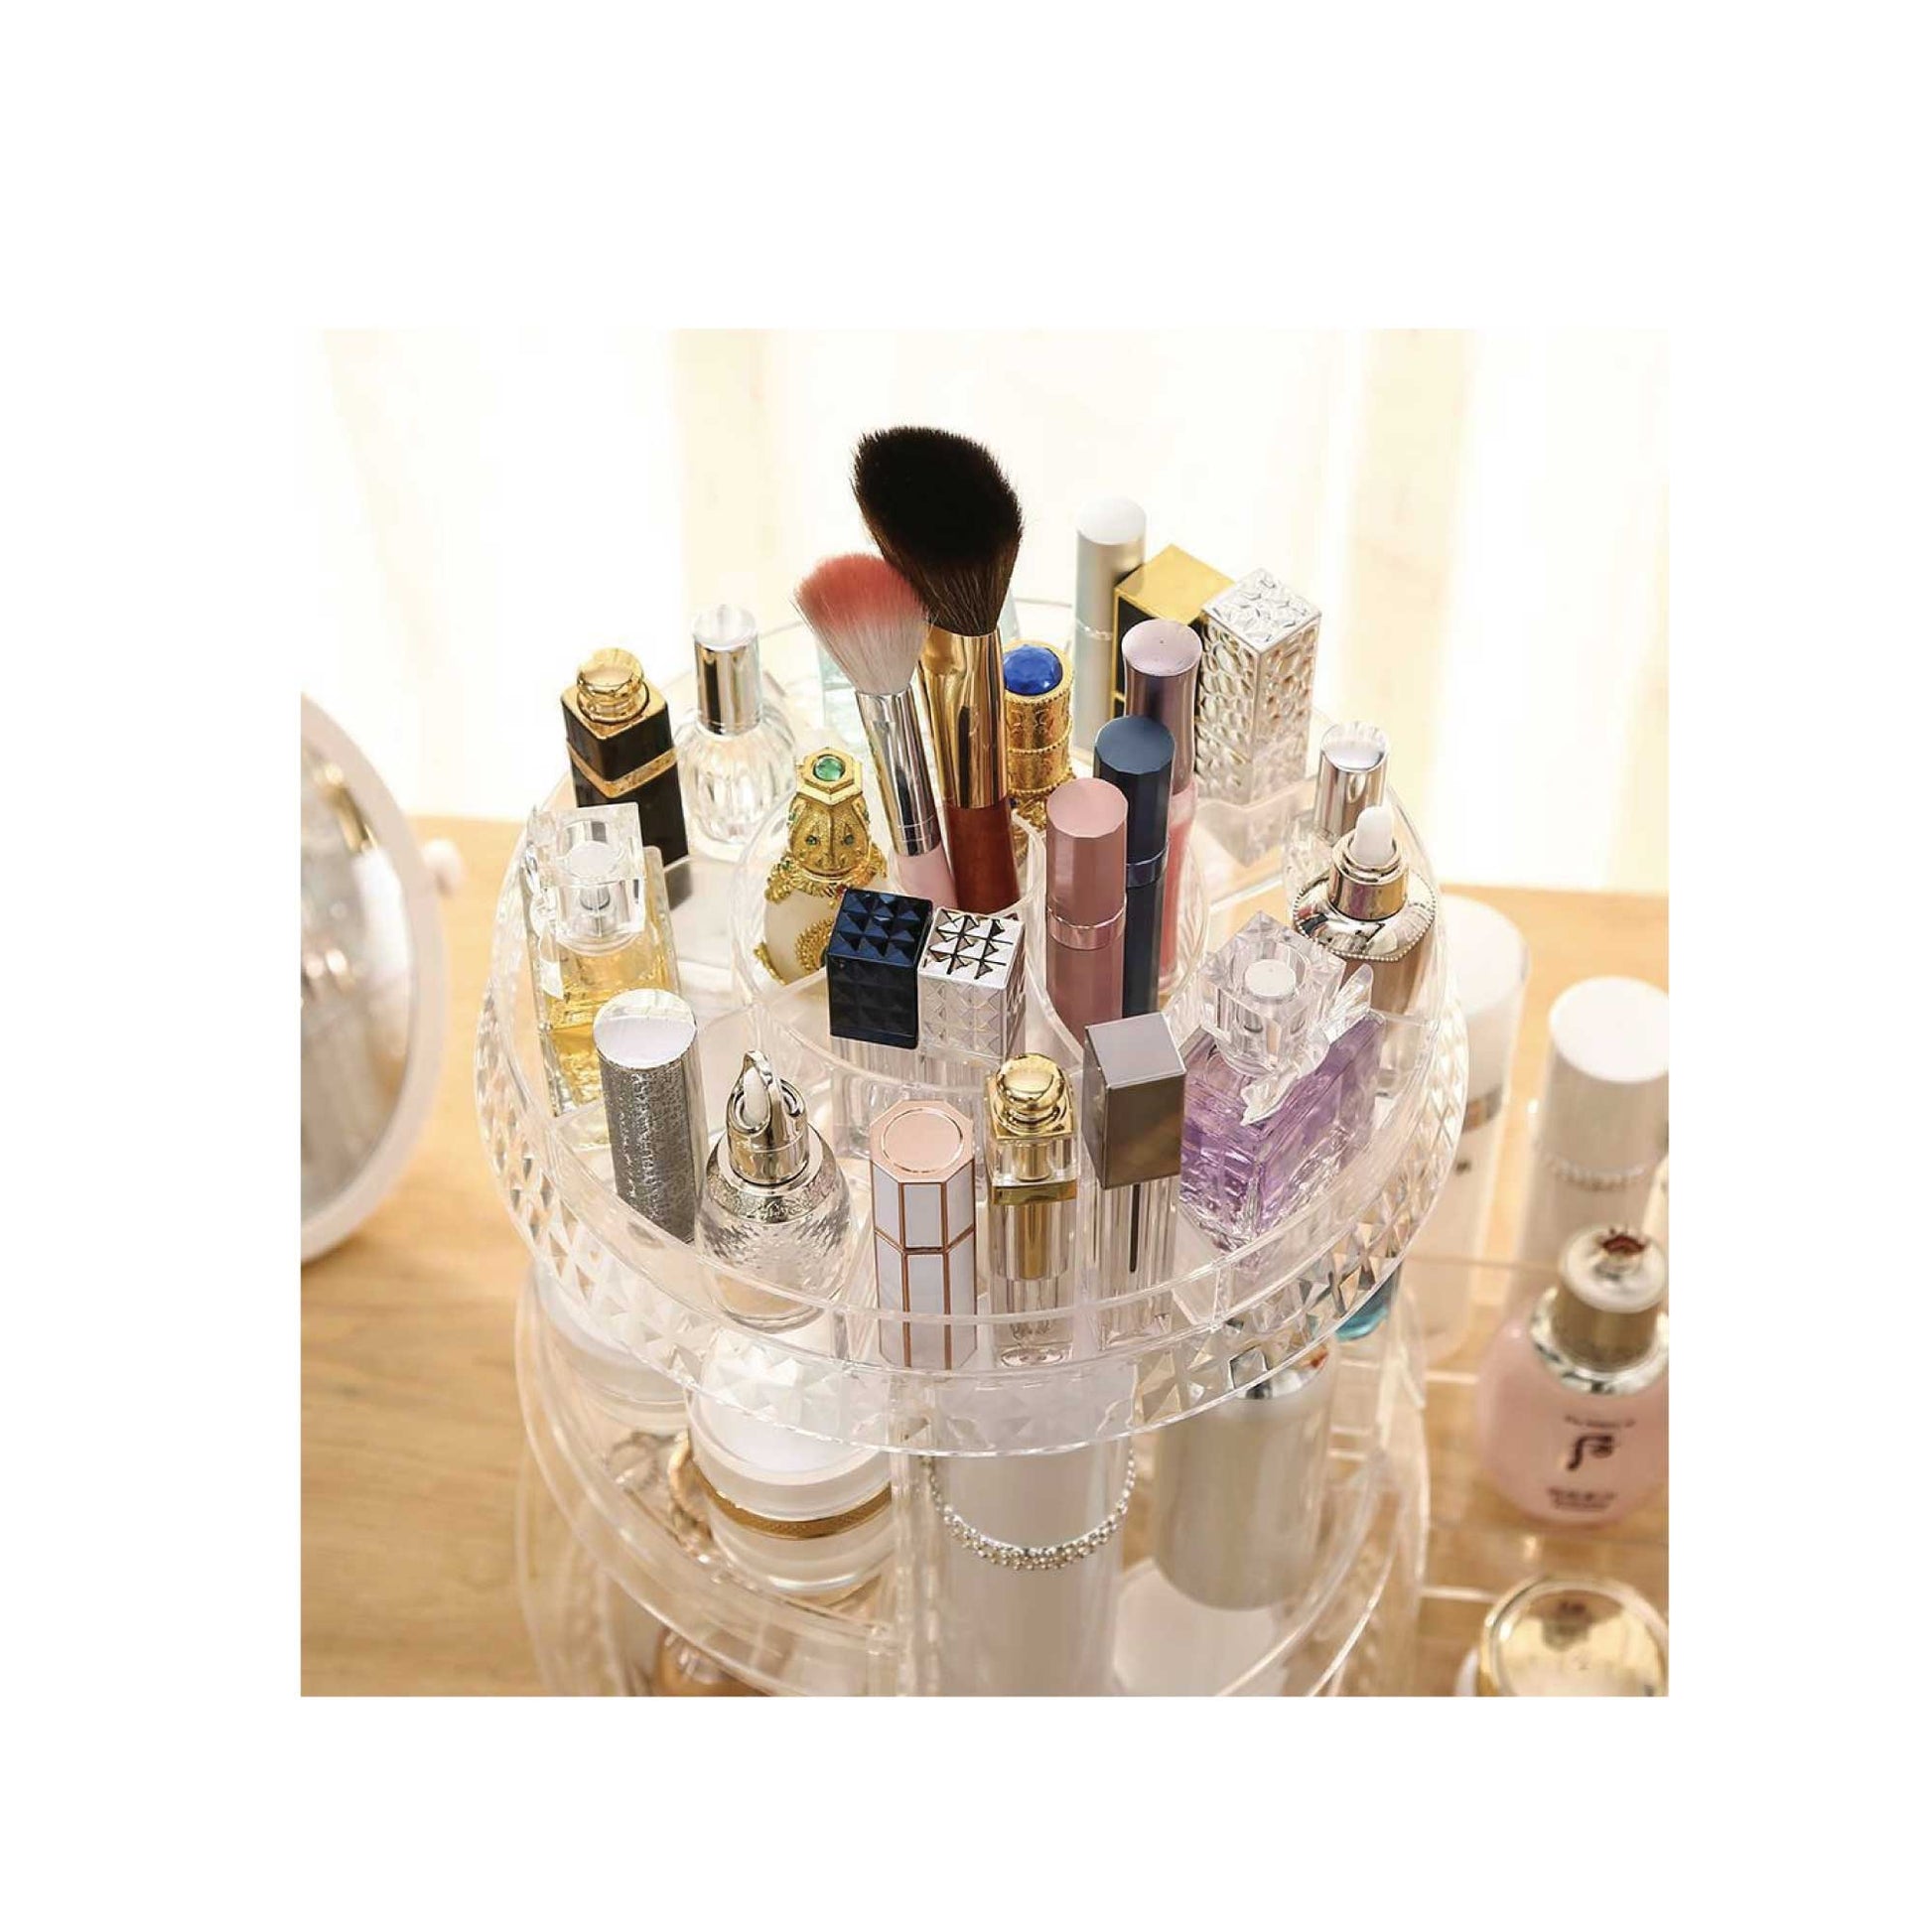 Makeup Organiser Rotating Stand - Cosmetic Storage Large Tiered Display Tray